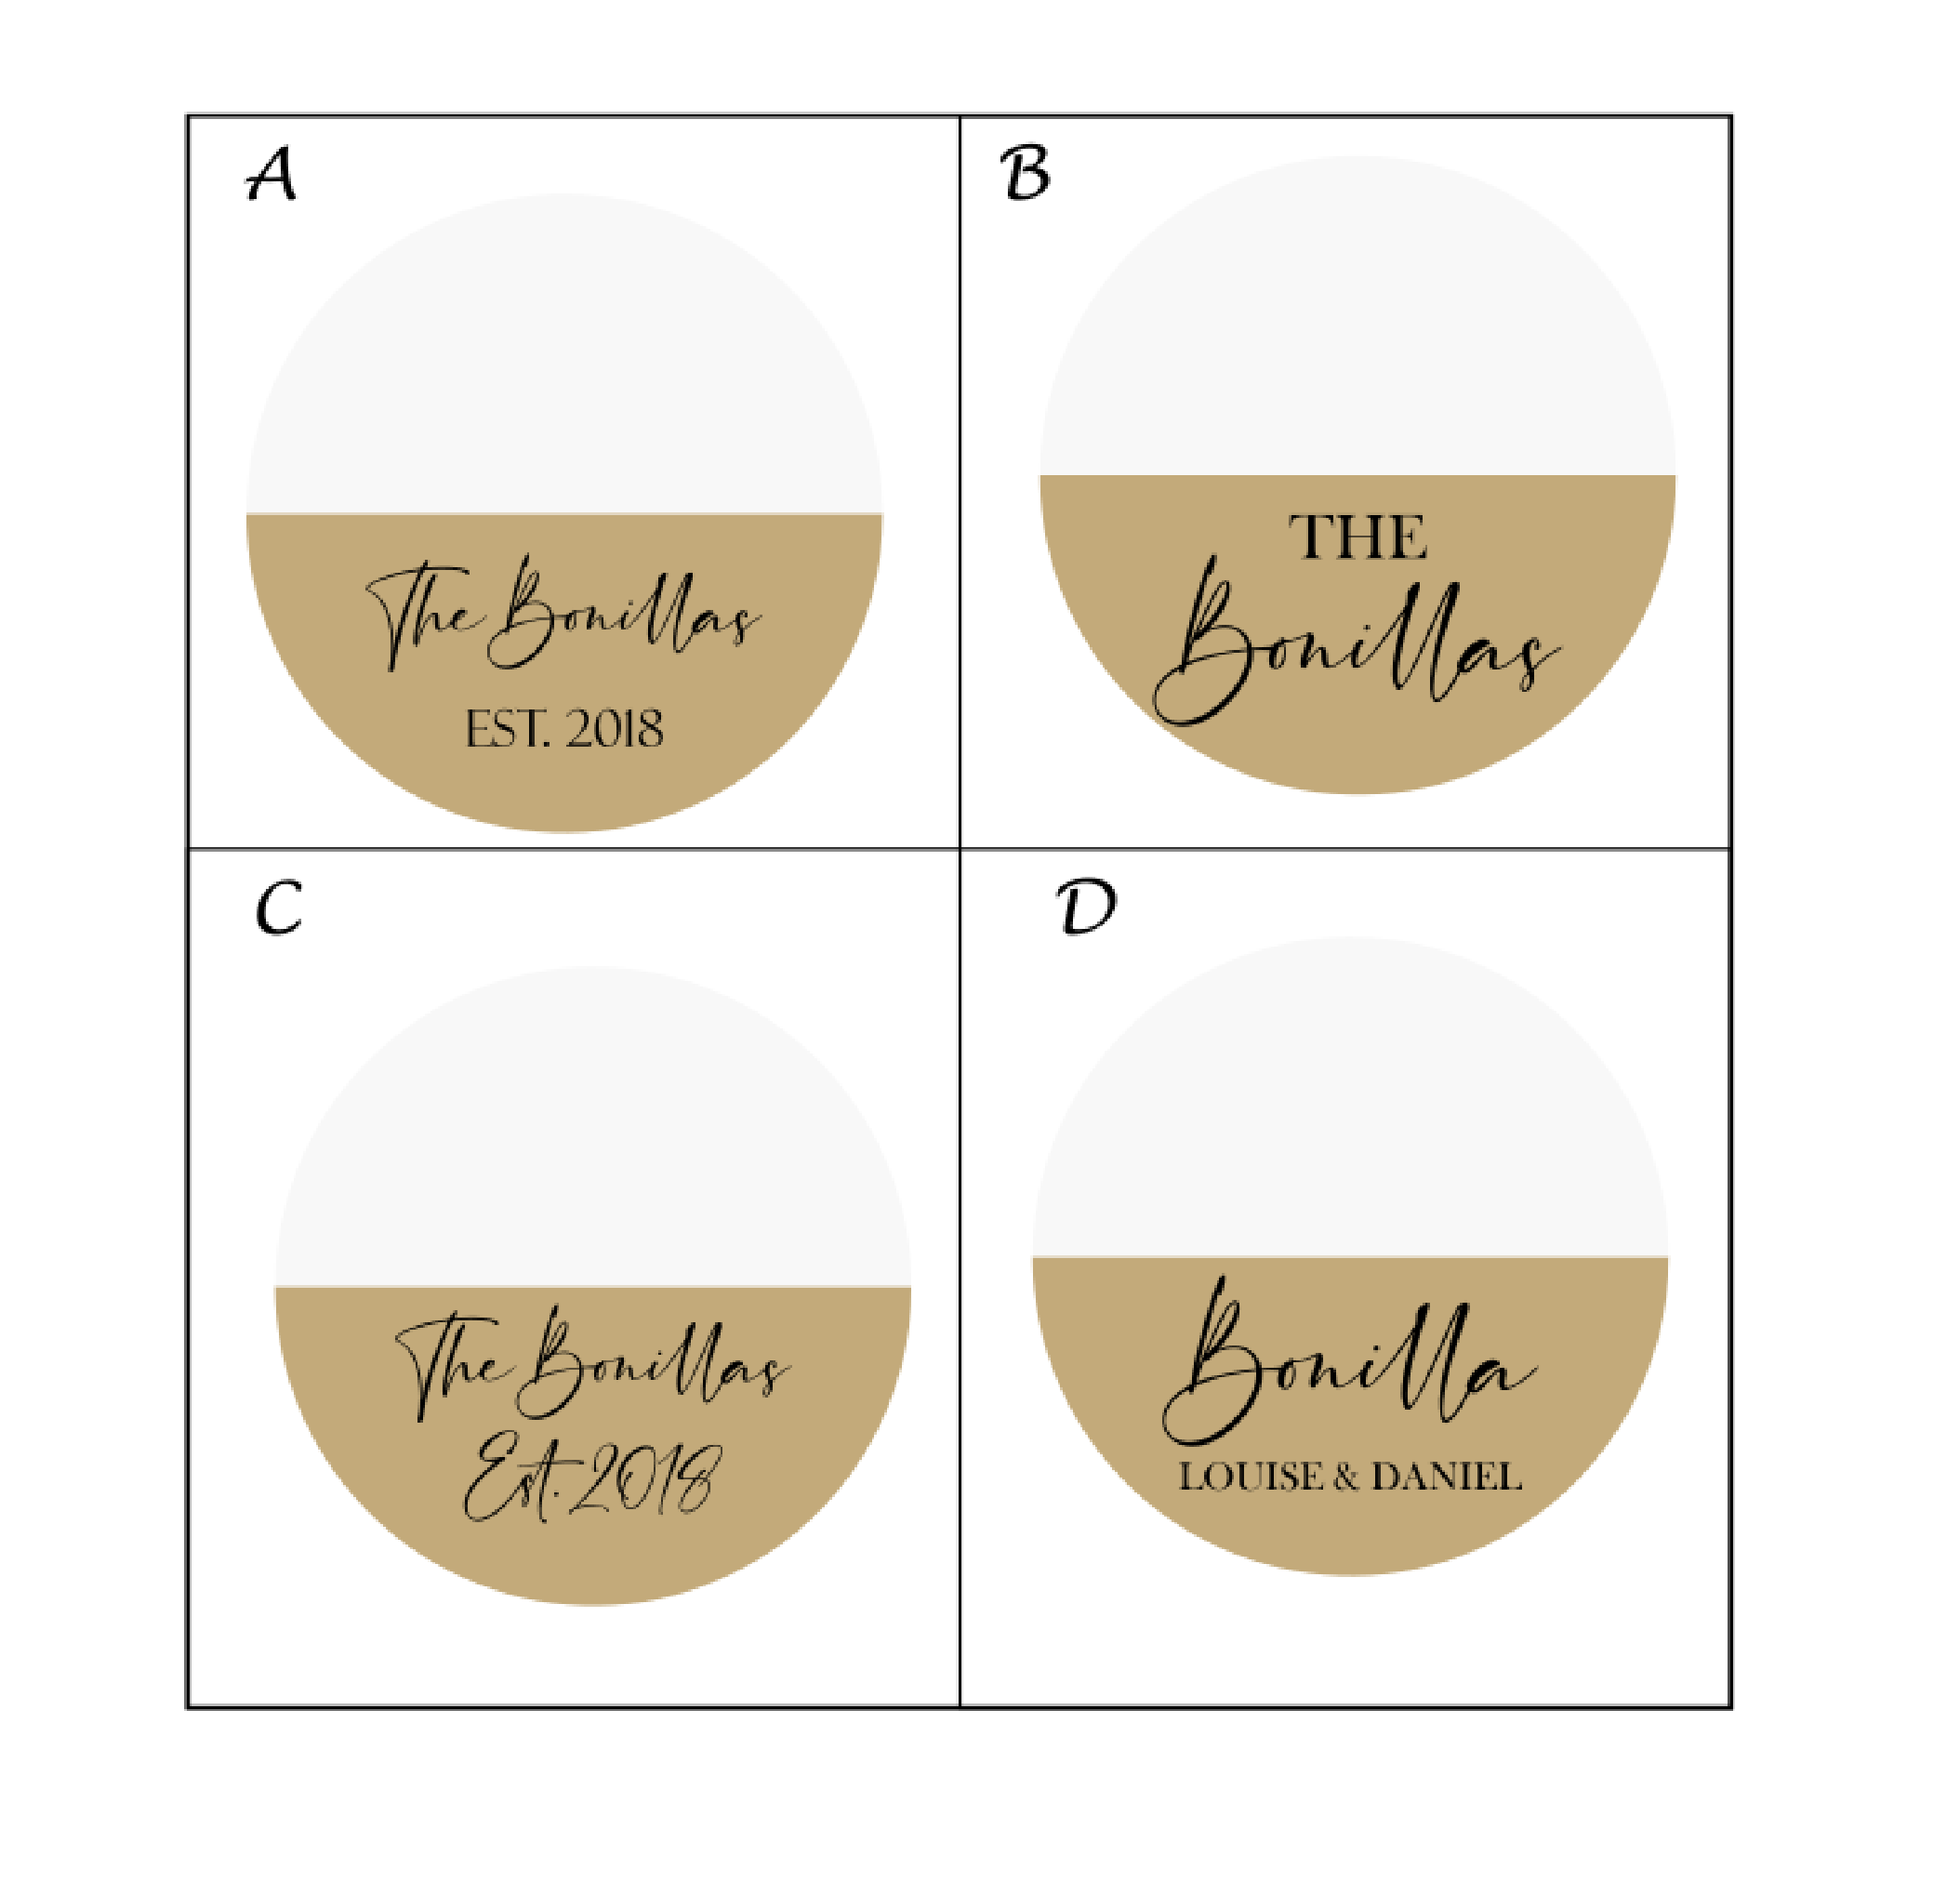 Personalised Marble and Wood Coasters - Gift